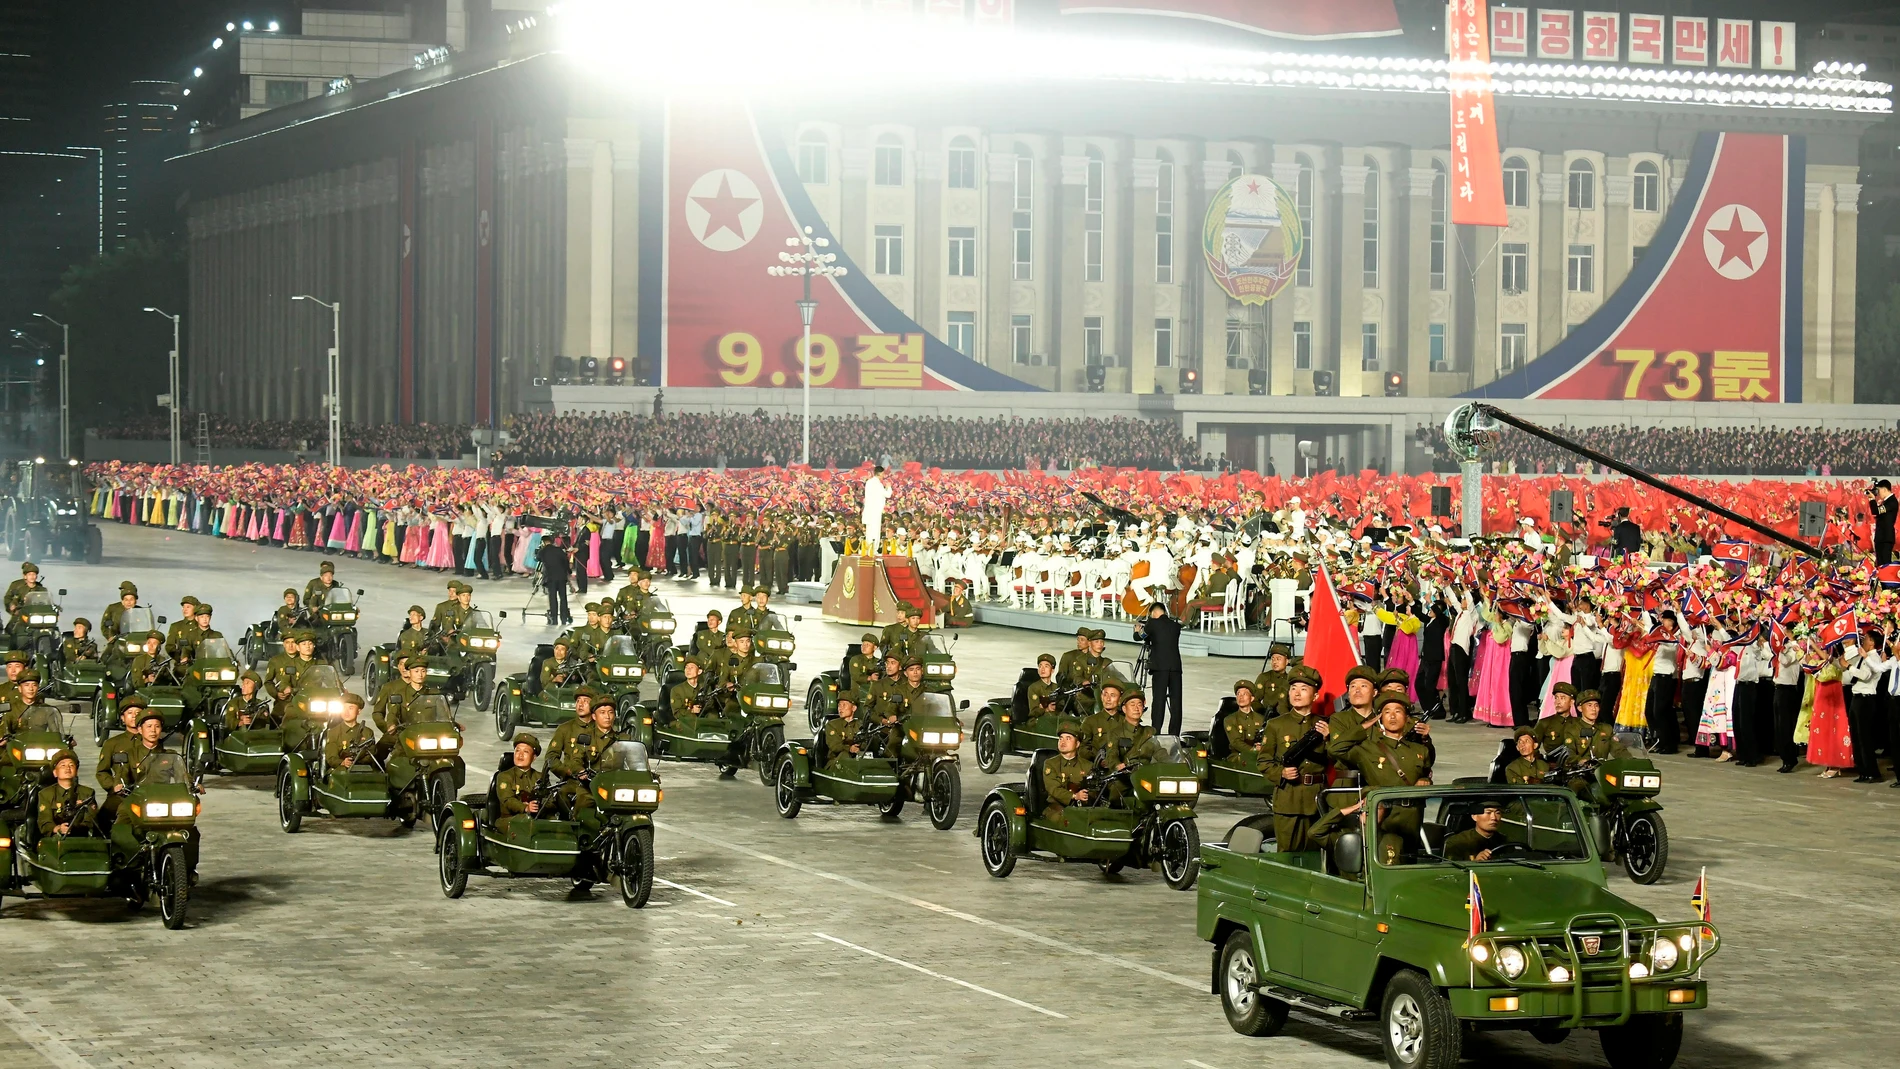 Pyongyang (Korea, Democratic People''s Republic Of), 09/09/2021.- A photo released by the official North Korean Central News Agency (KCNA) shows a moment from the military parade at Kim Il-sung Square in Pyongyang, North Korea, early 09 September 2021. The late-night parade was held to celebrate the 73rd founding anniversary of the Democratic People's Republic of Korea. (Corea del Norte) EFE/EPA/KCNA EDITORIAL USE ONLY EDITORIAL USE ONLY